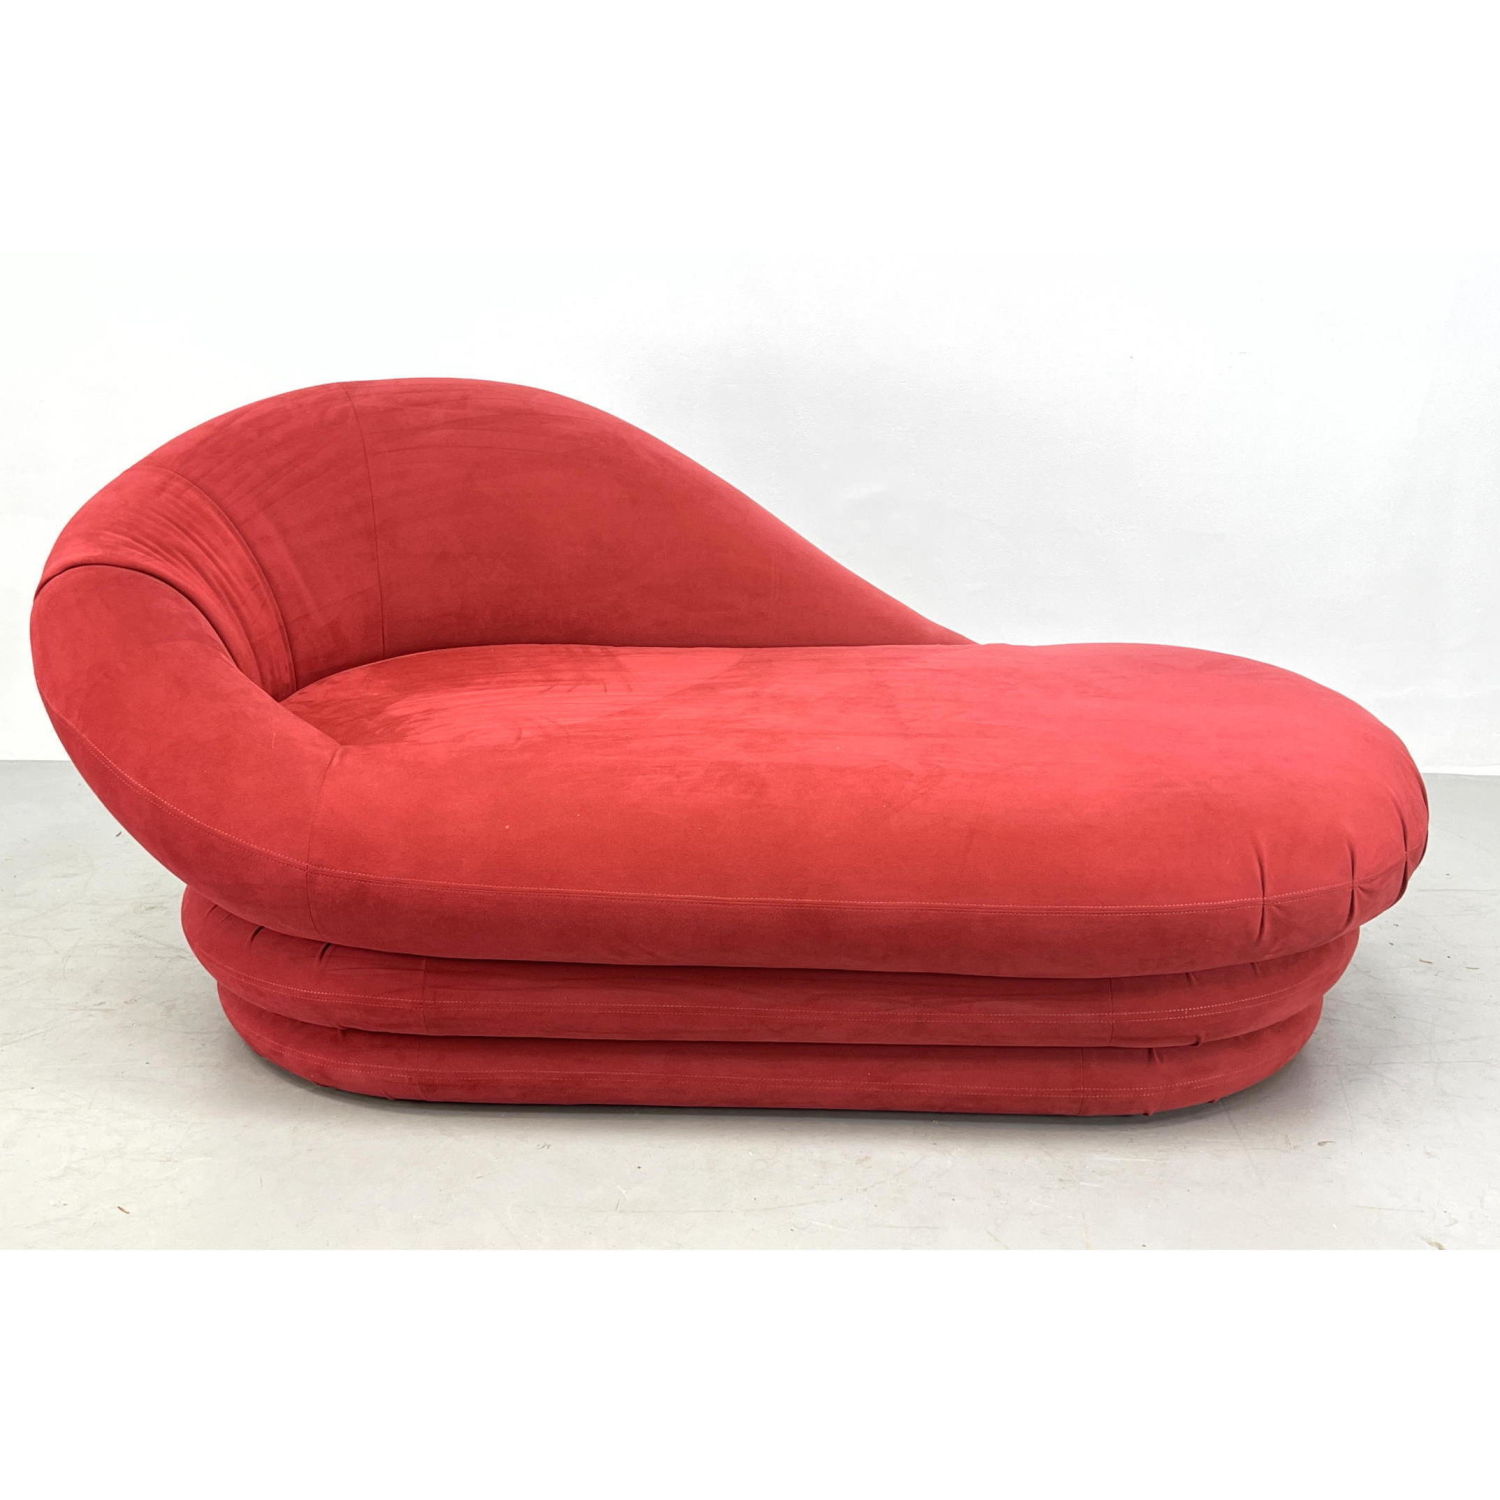 CARSON S Red Ultrasuede Chaise 2ba565